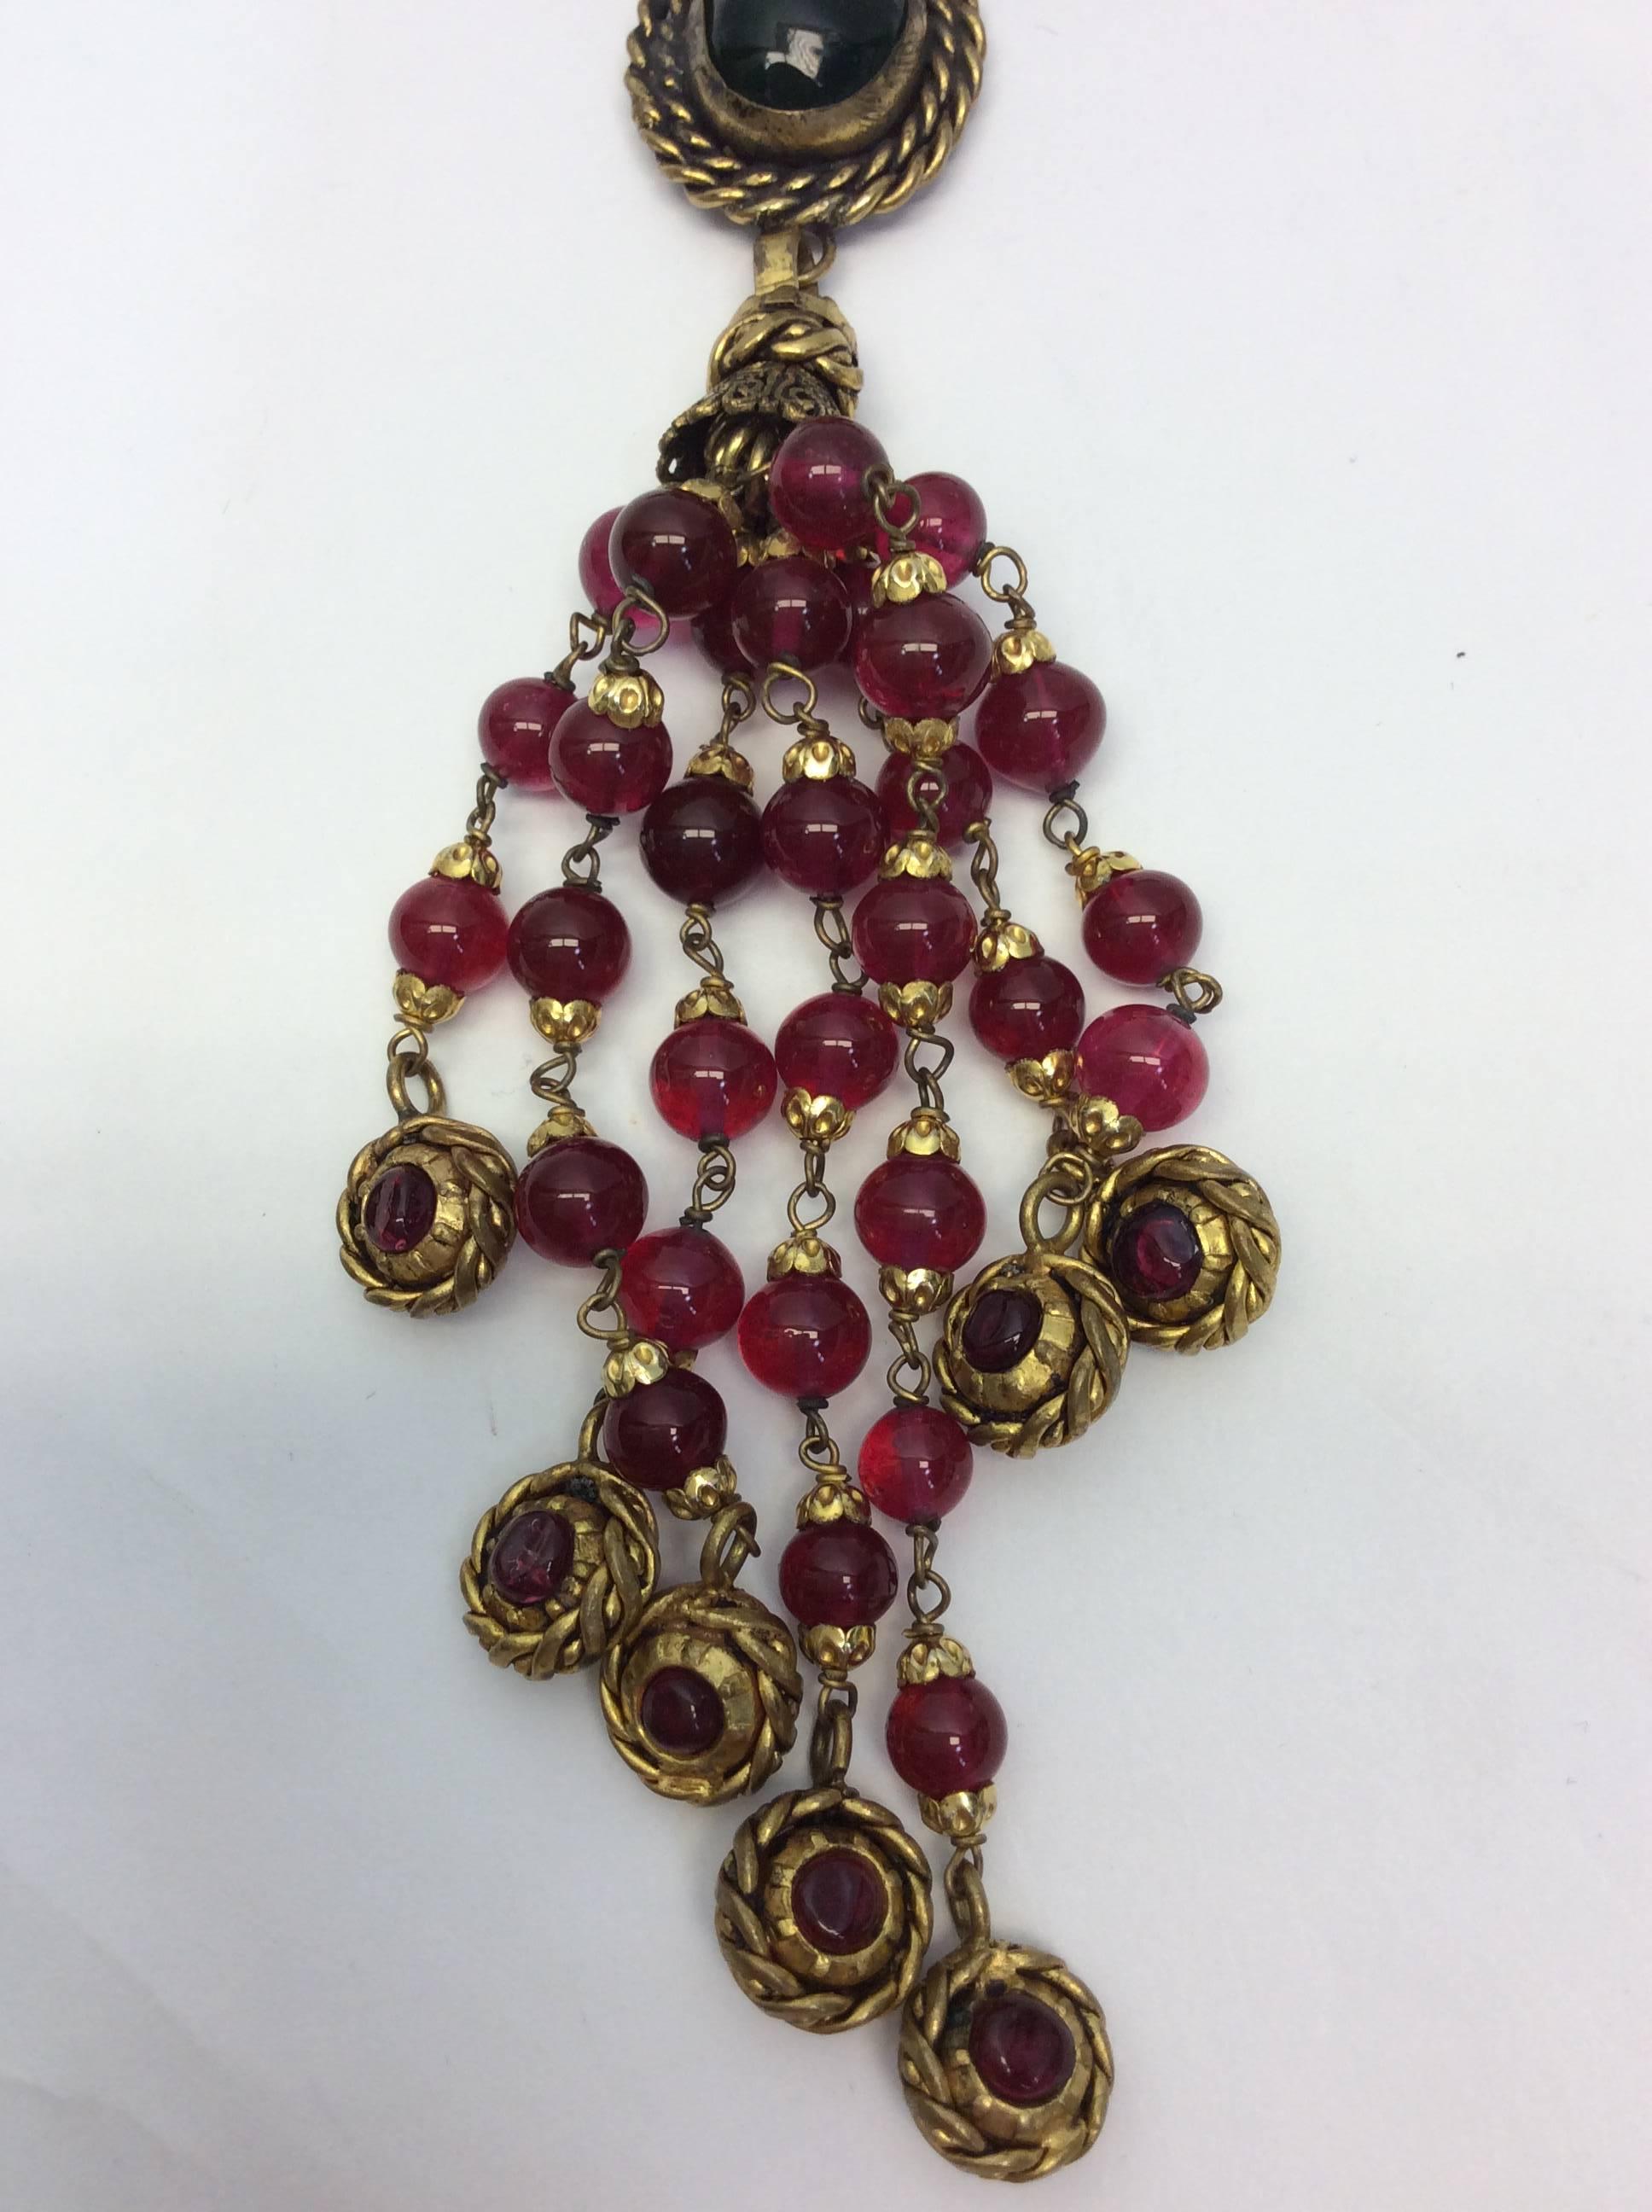 Chanel Vintage Necklace and Earring Set In Good Condition For Sale In Narberth, PA